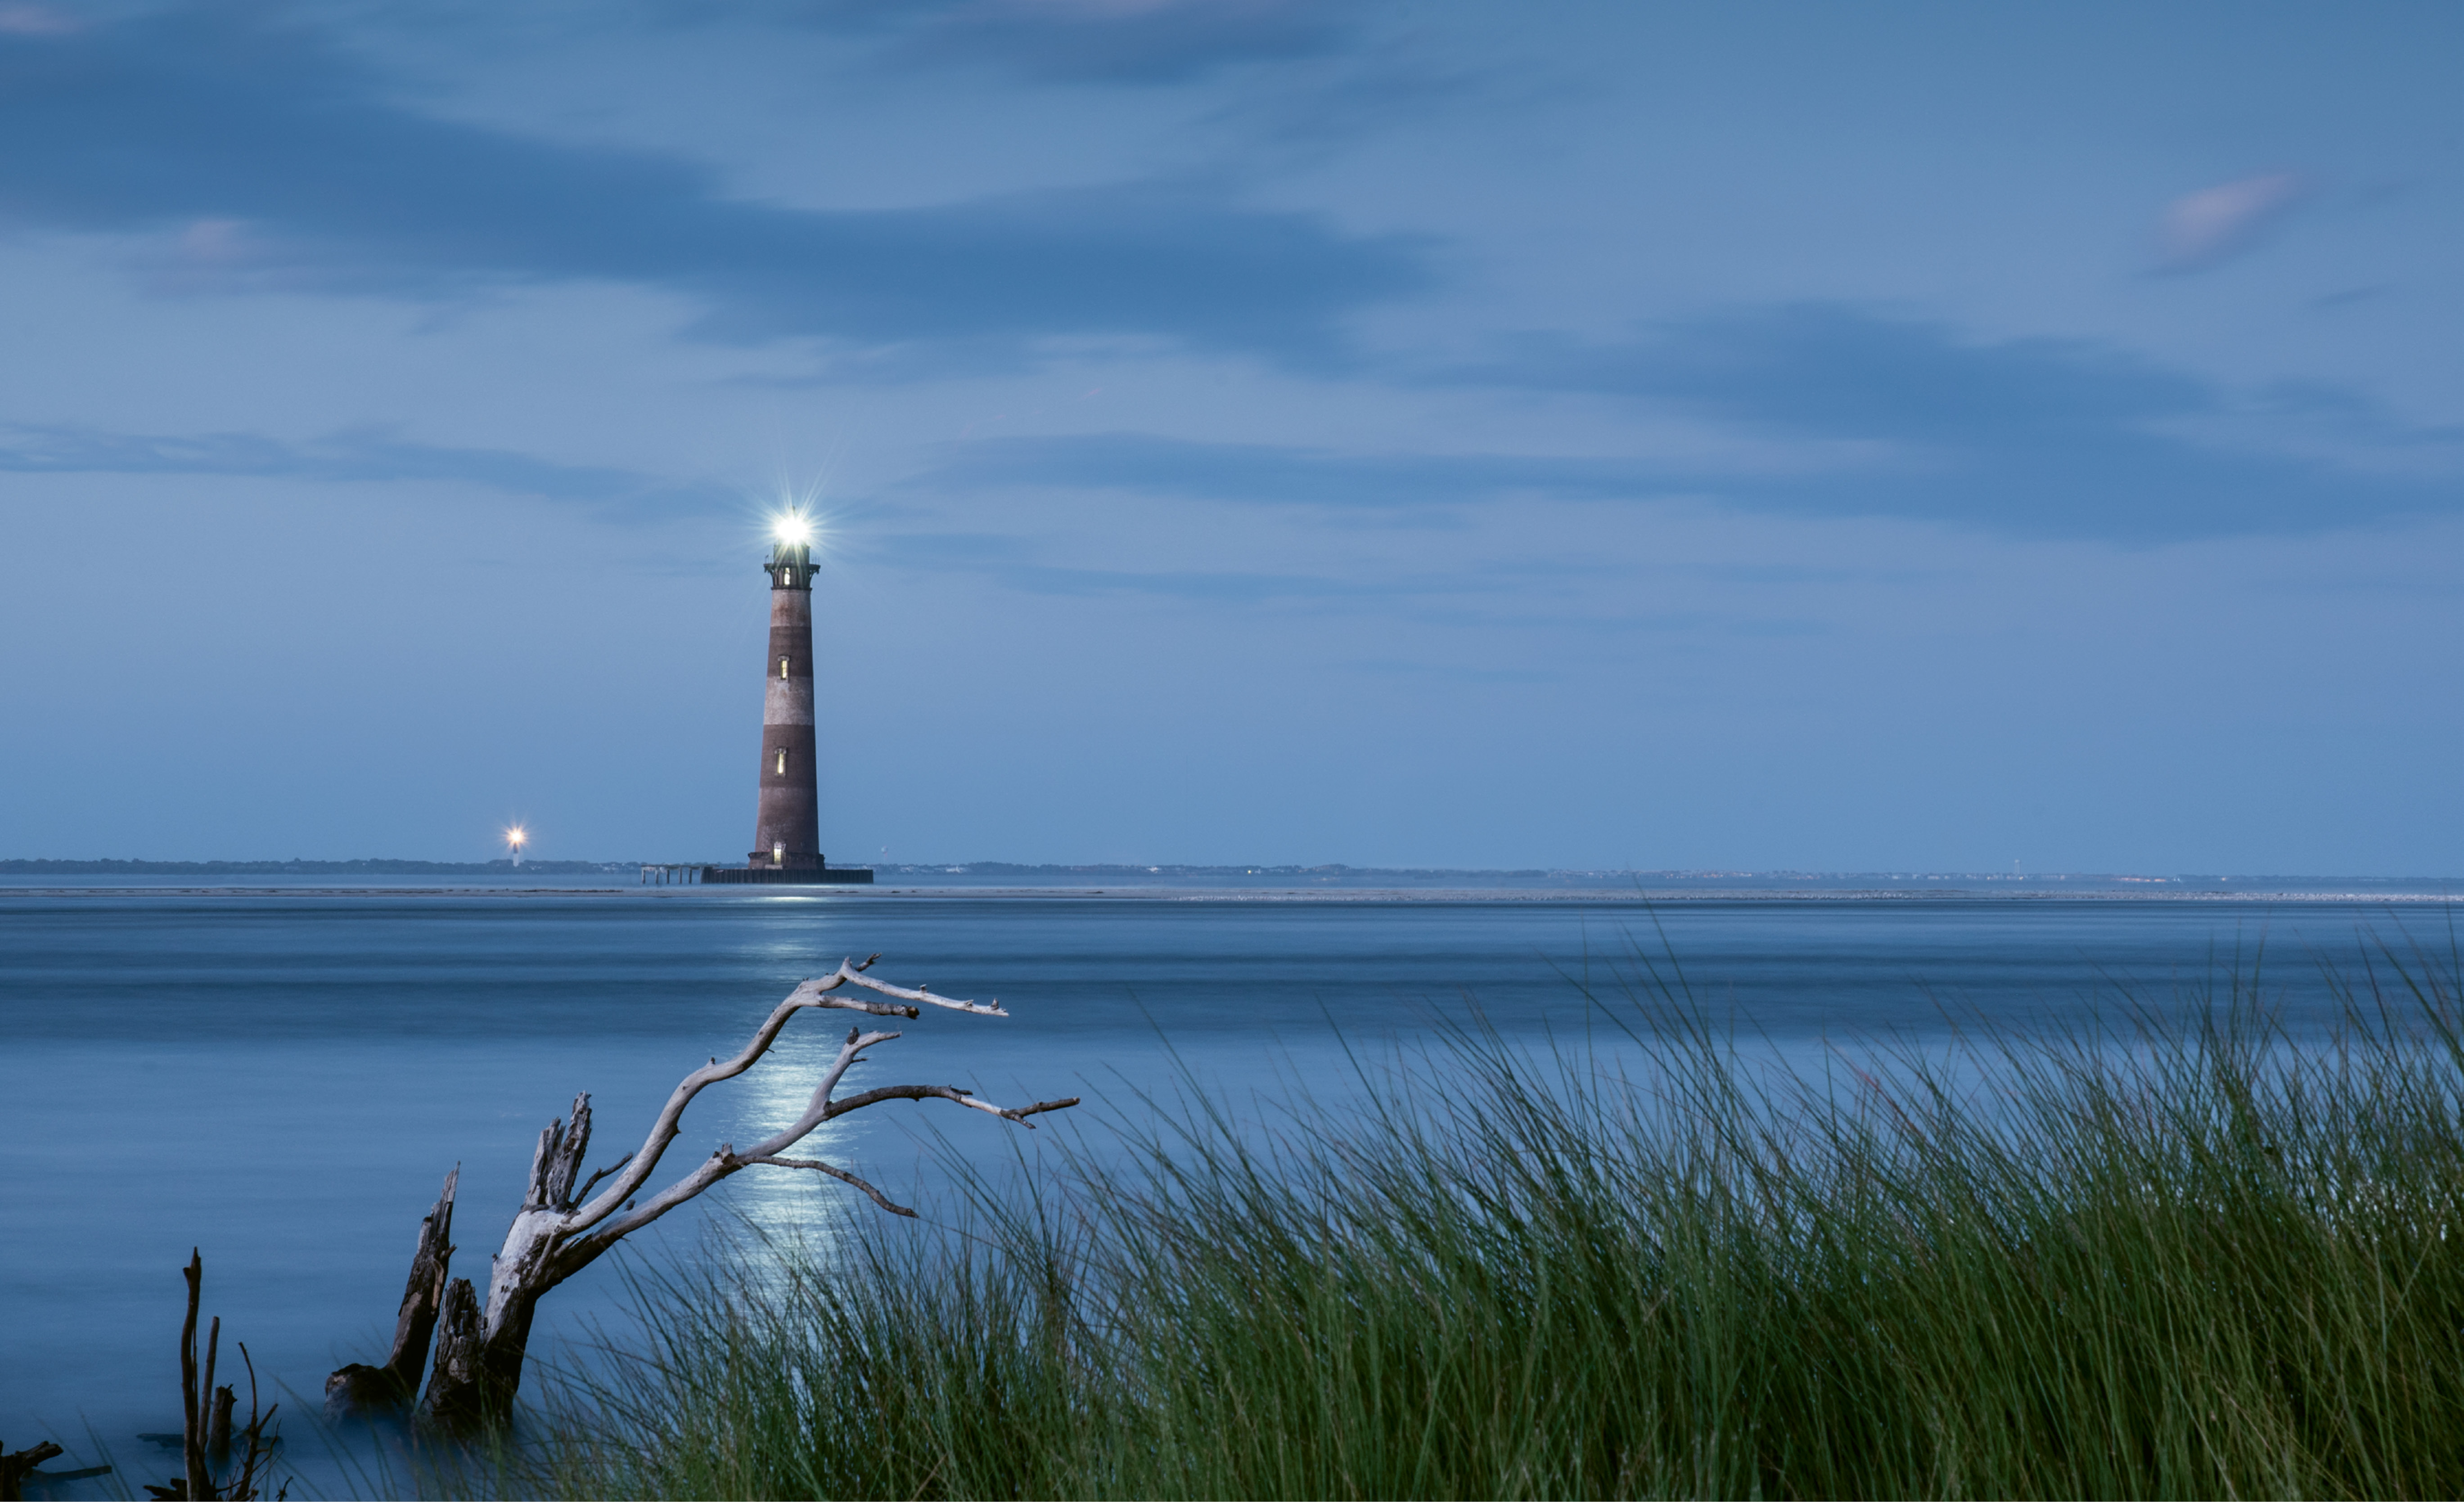 Two Lights Burning by Charles Hooker  {Professional category} - The re-illumination of the Morris Island Lighthouse on October 1, 2016